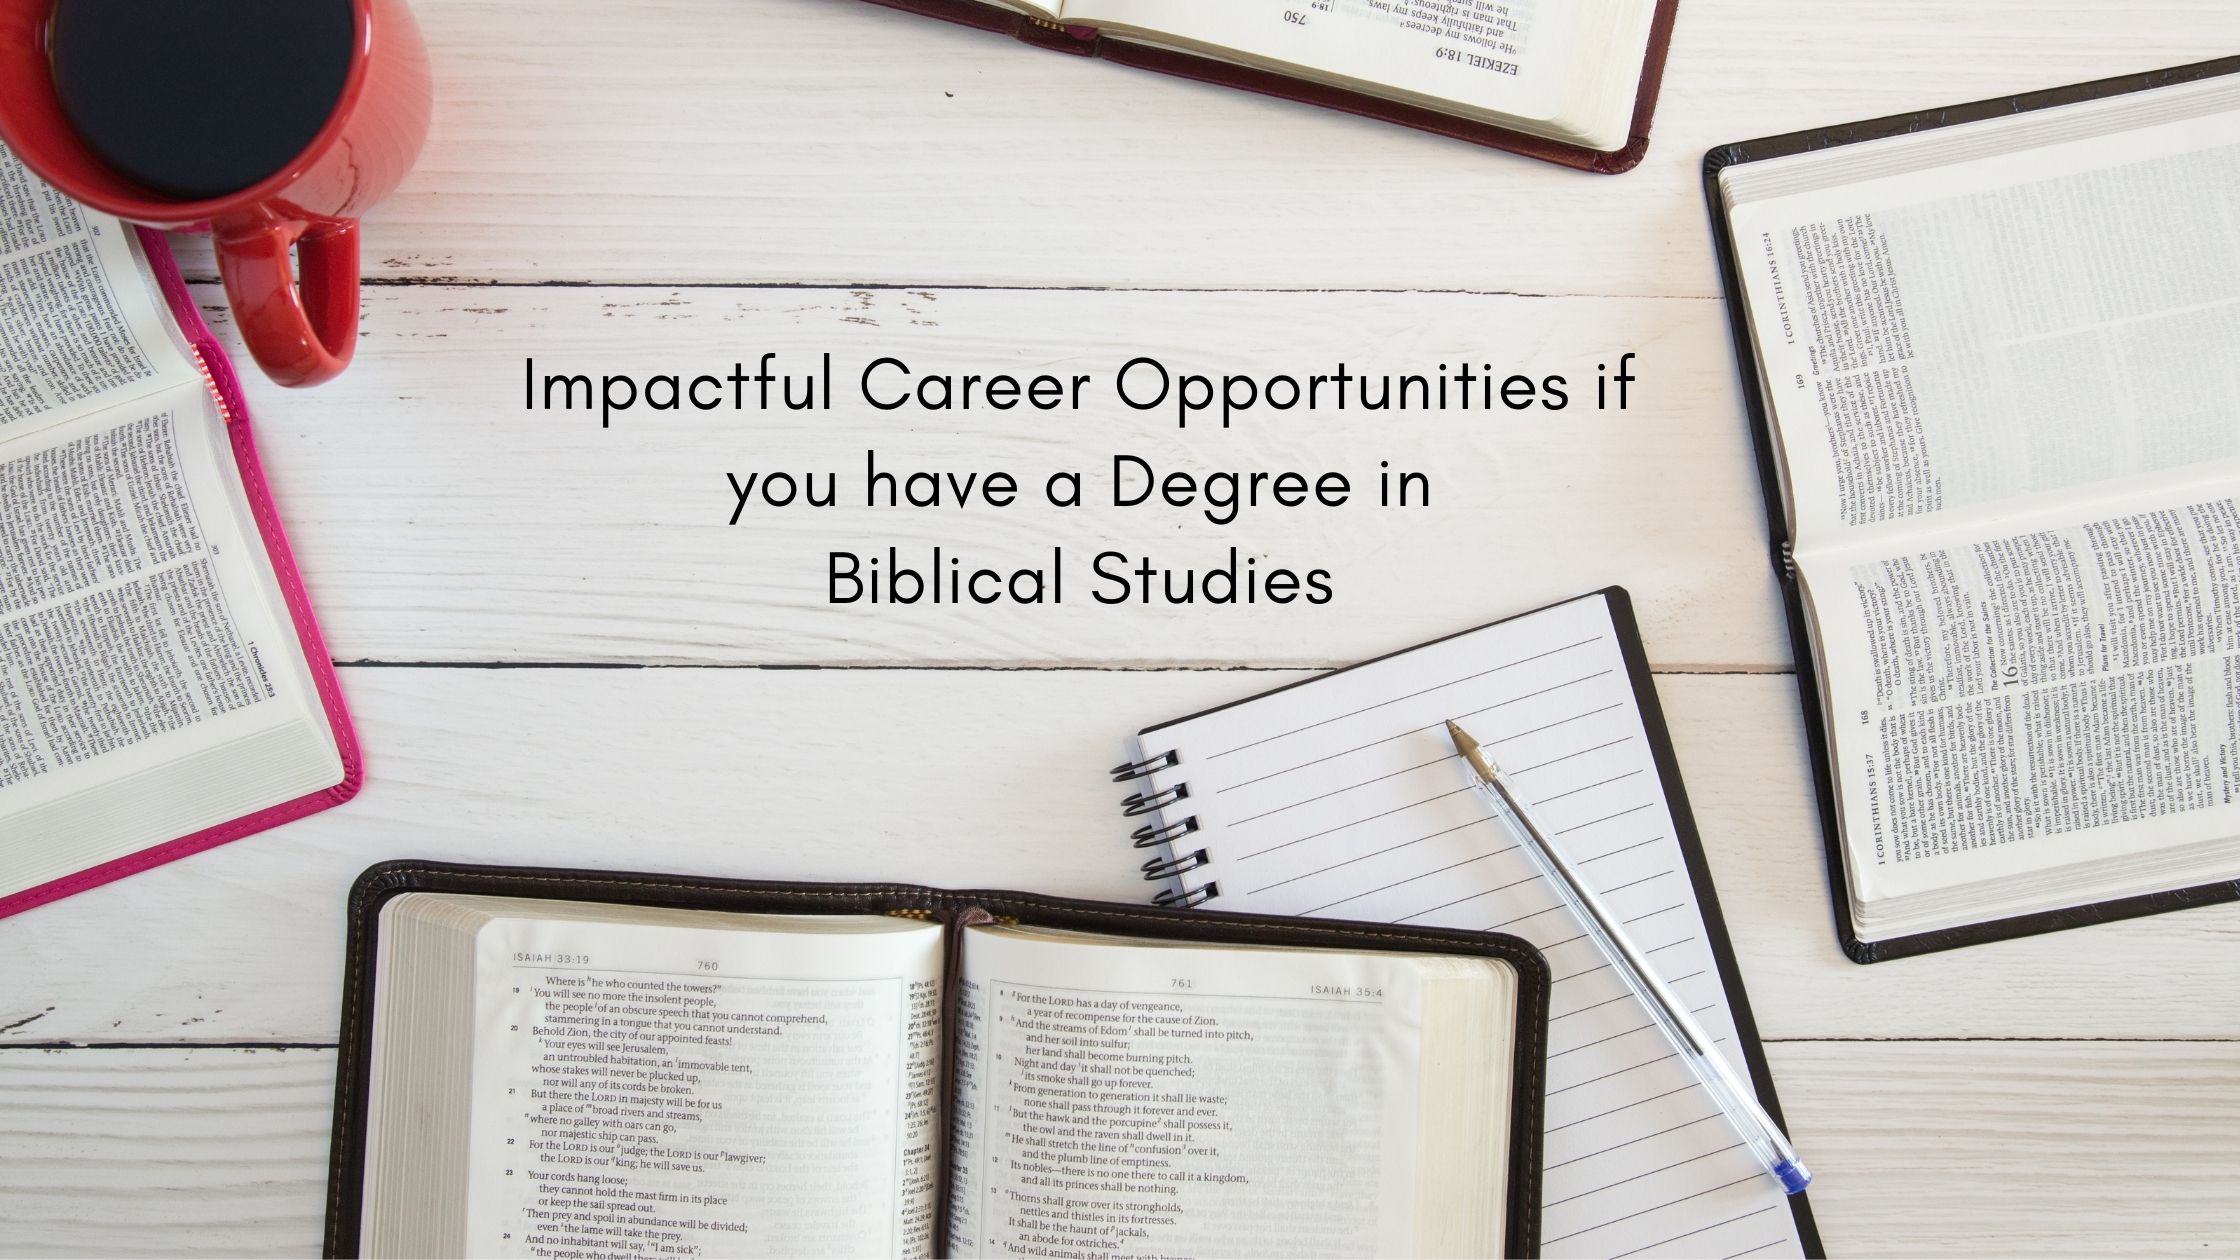 Image of Impactful Career Opportunities if you have a Degree in Biblical Studies